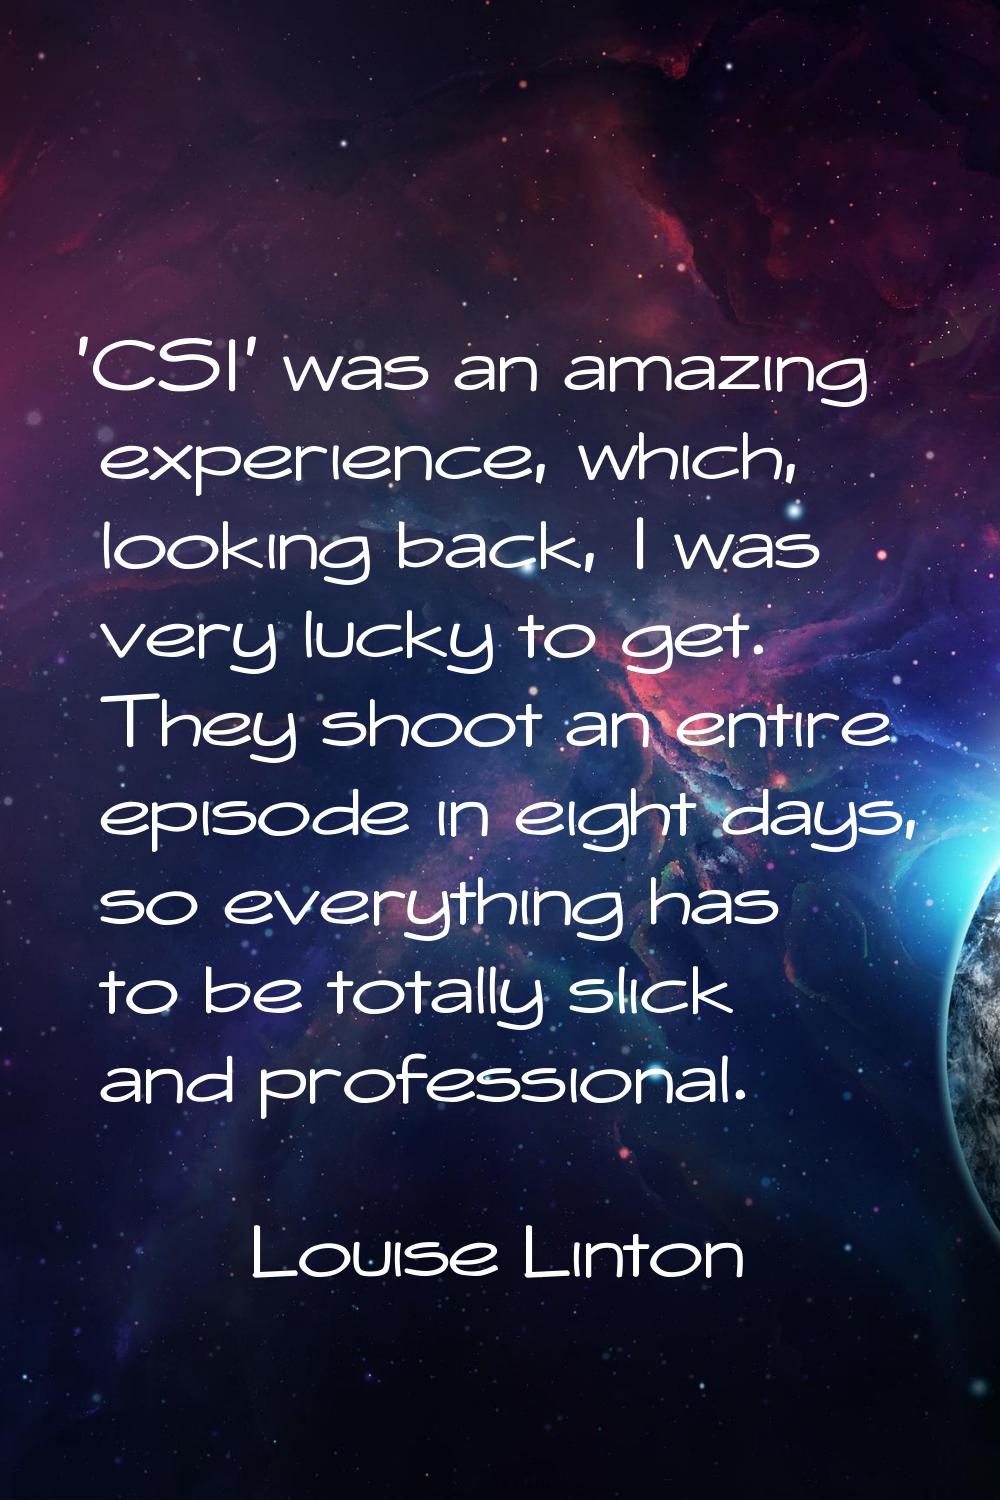 'CSI' was an amazing experience, which, looking back, I was very lucky to get. They shoot an entire